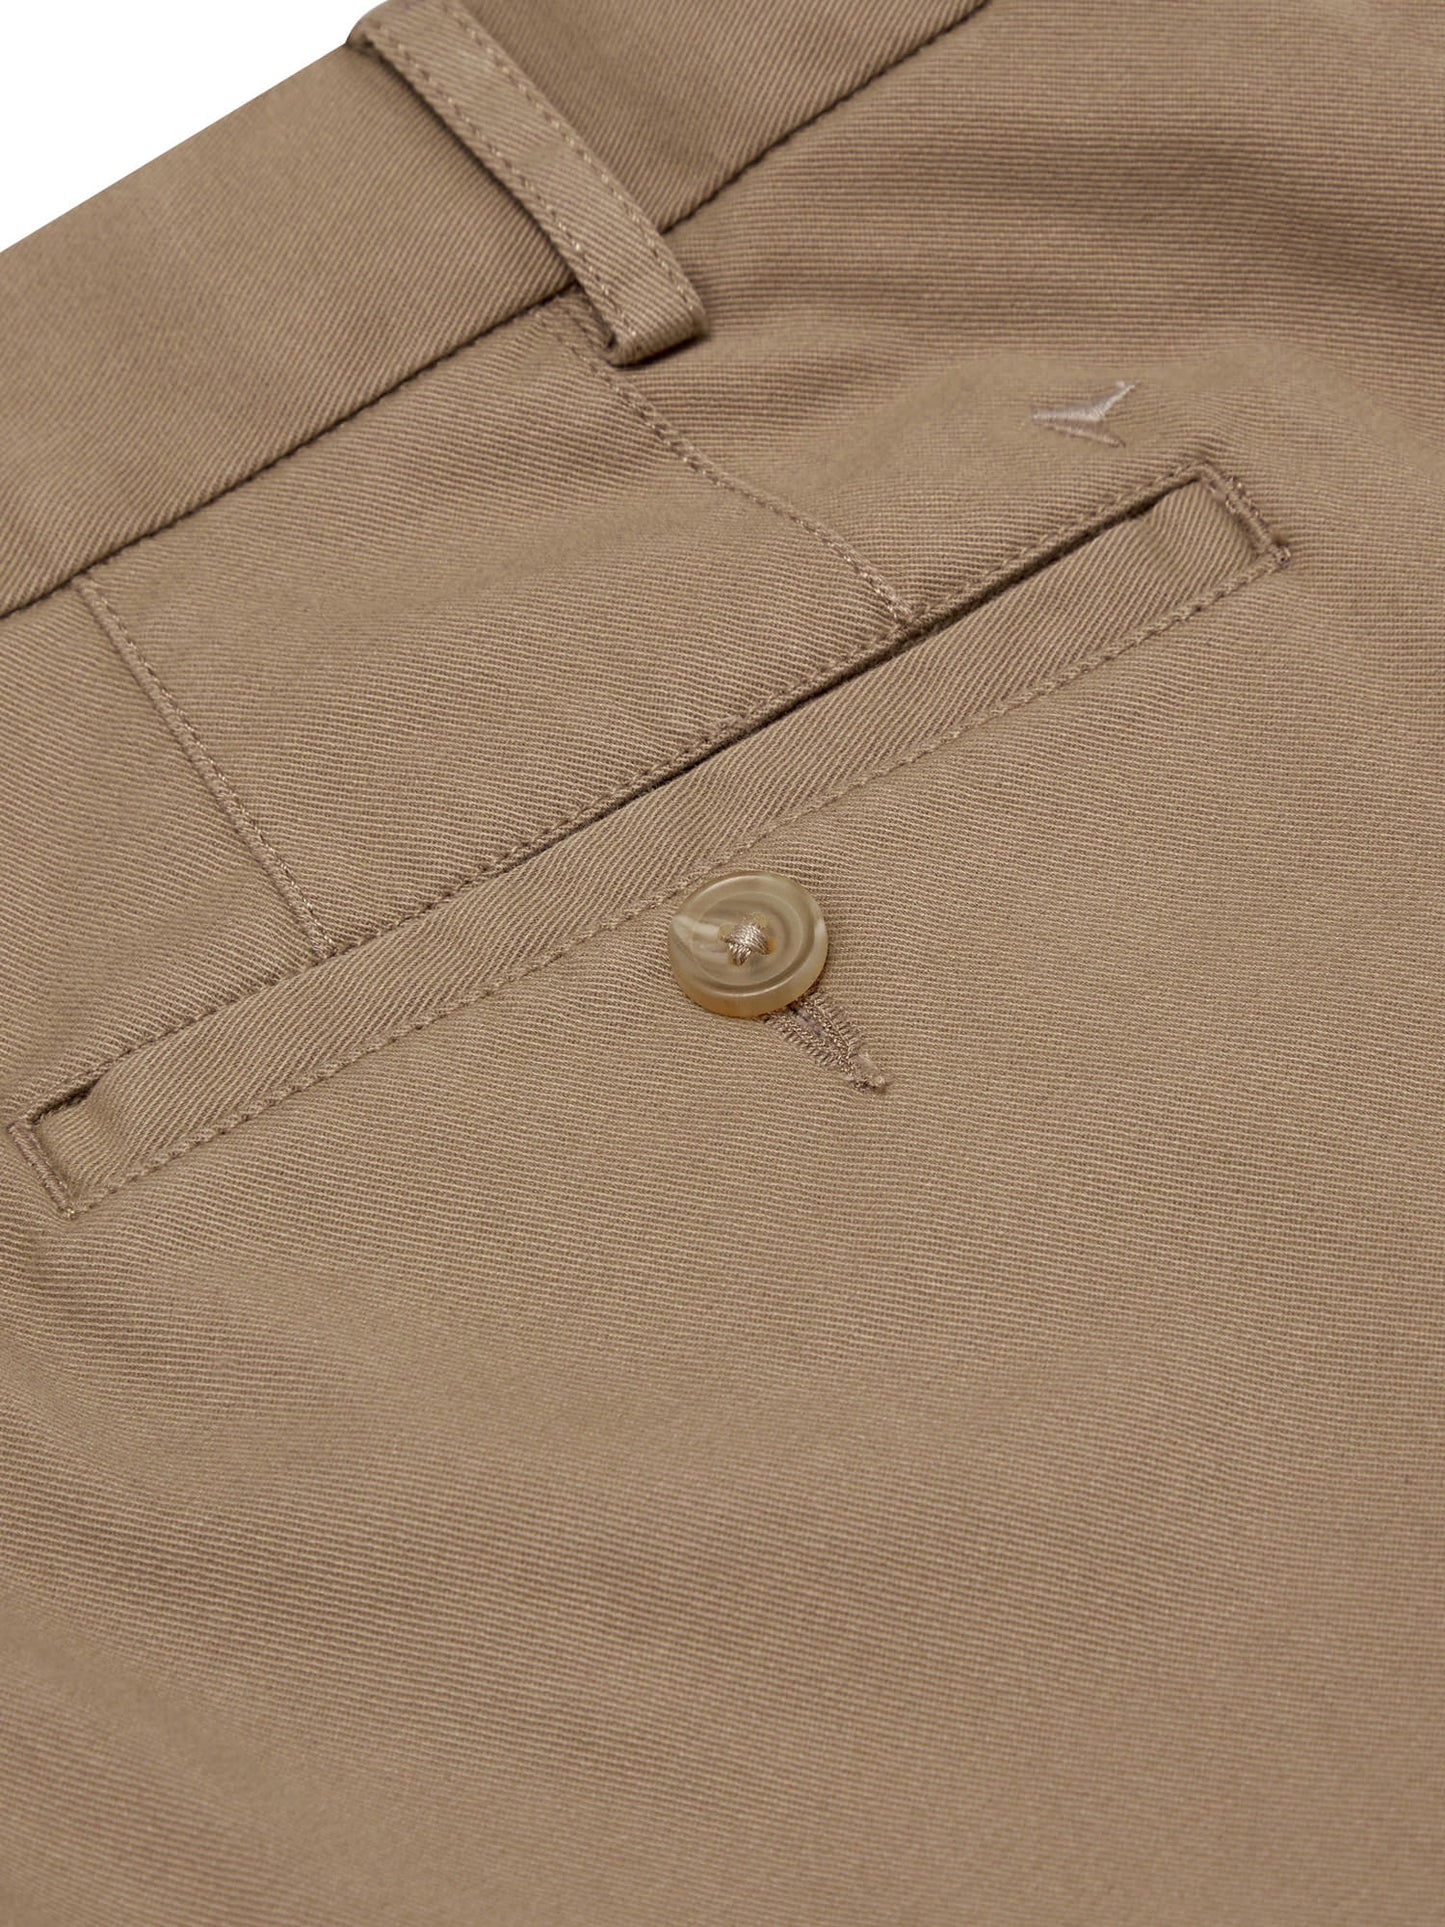 Expandable Waist Tapered Leg Chinos - Taupe